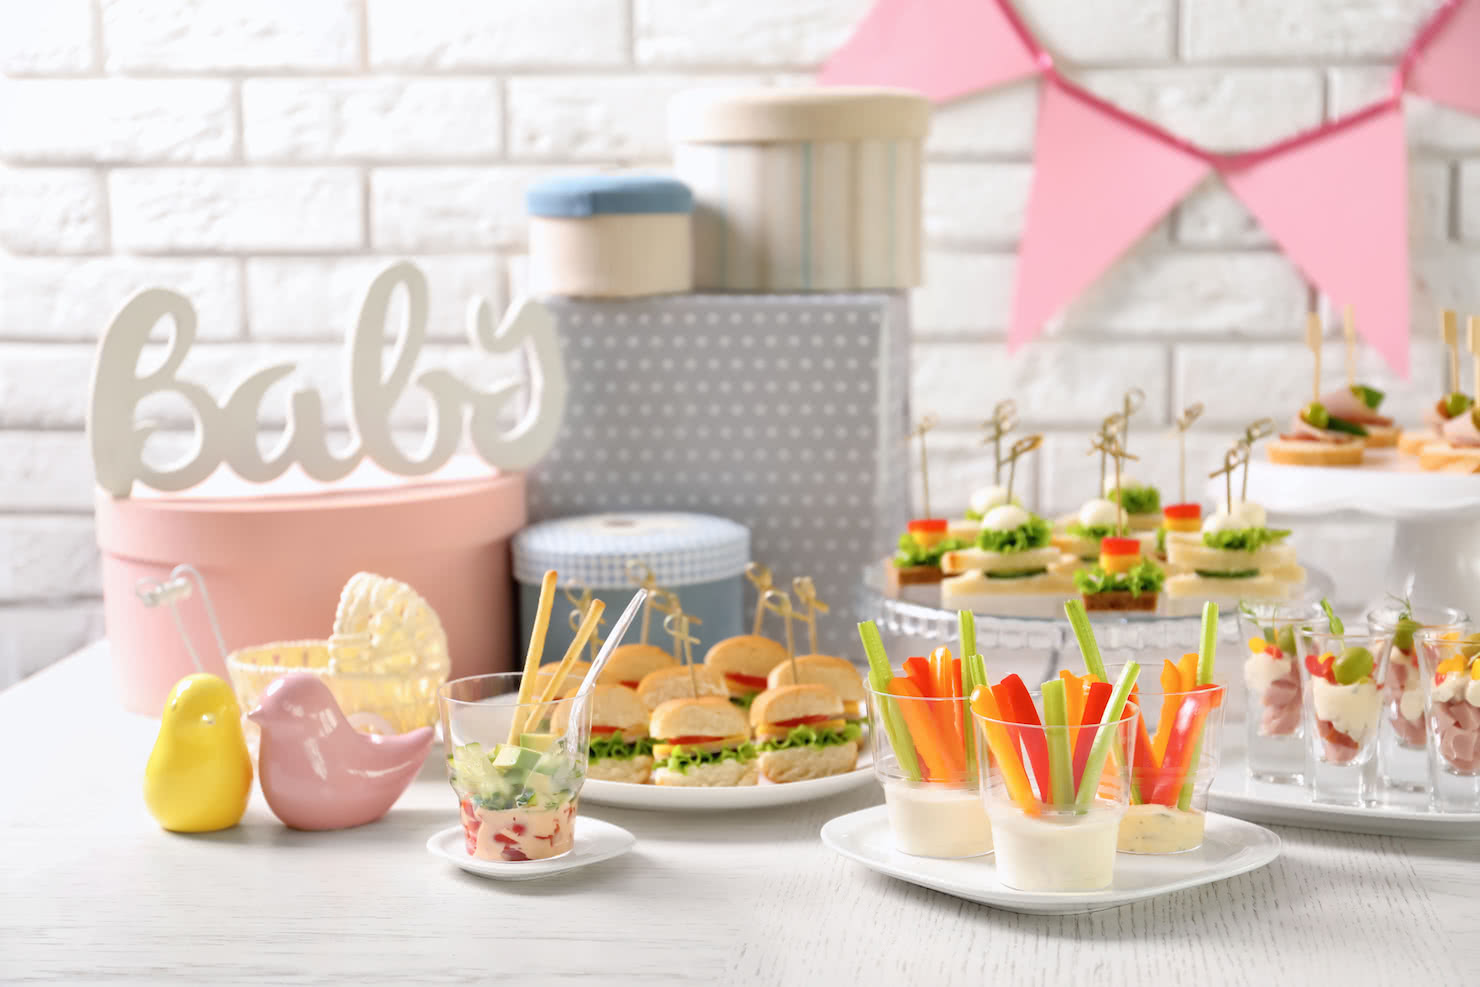 Table featuring sandwiches, finger foods, and baby shower gifts with a pink bunting banner hanging on a white brick wall